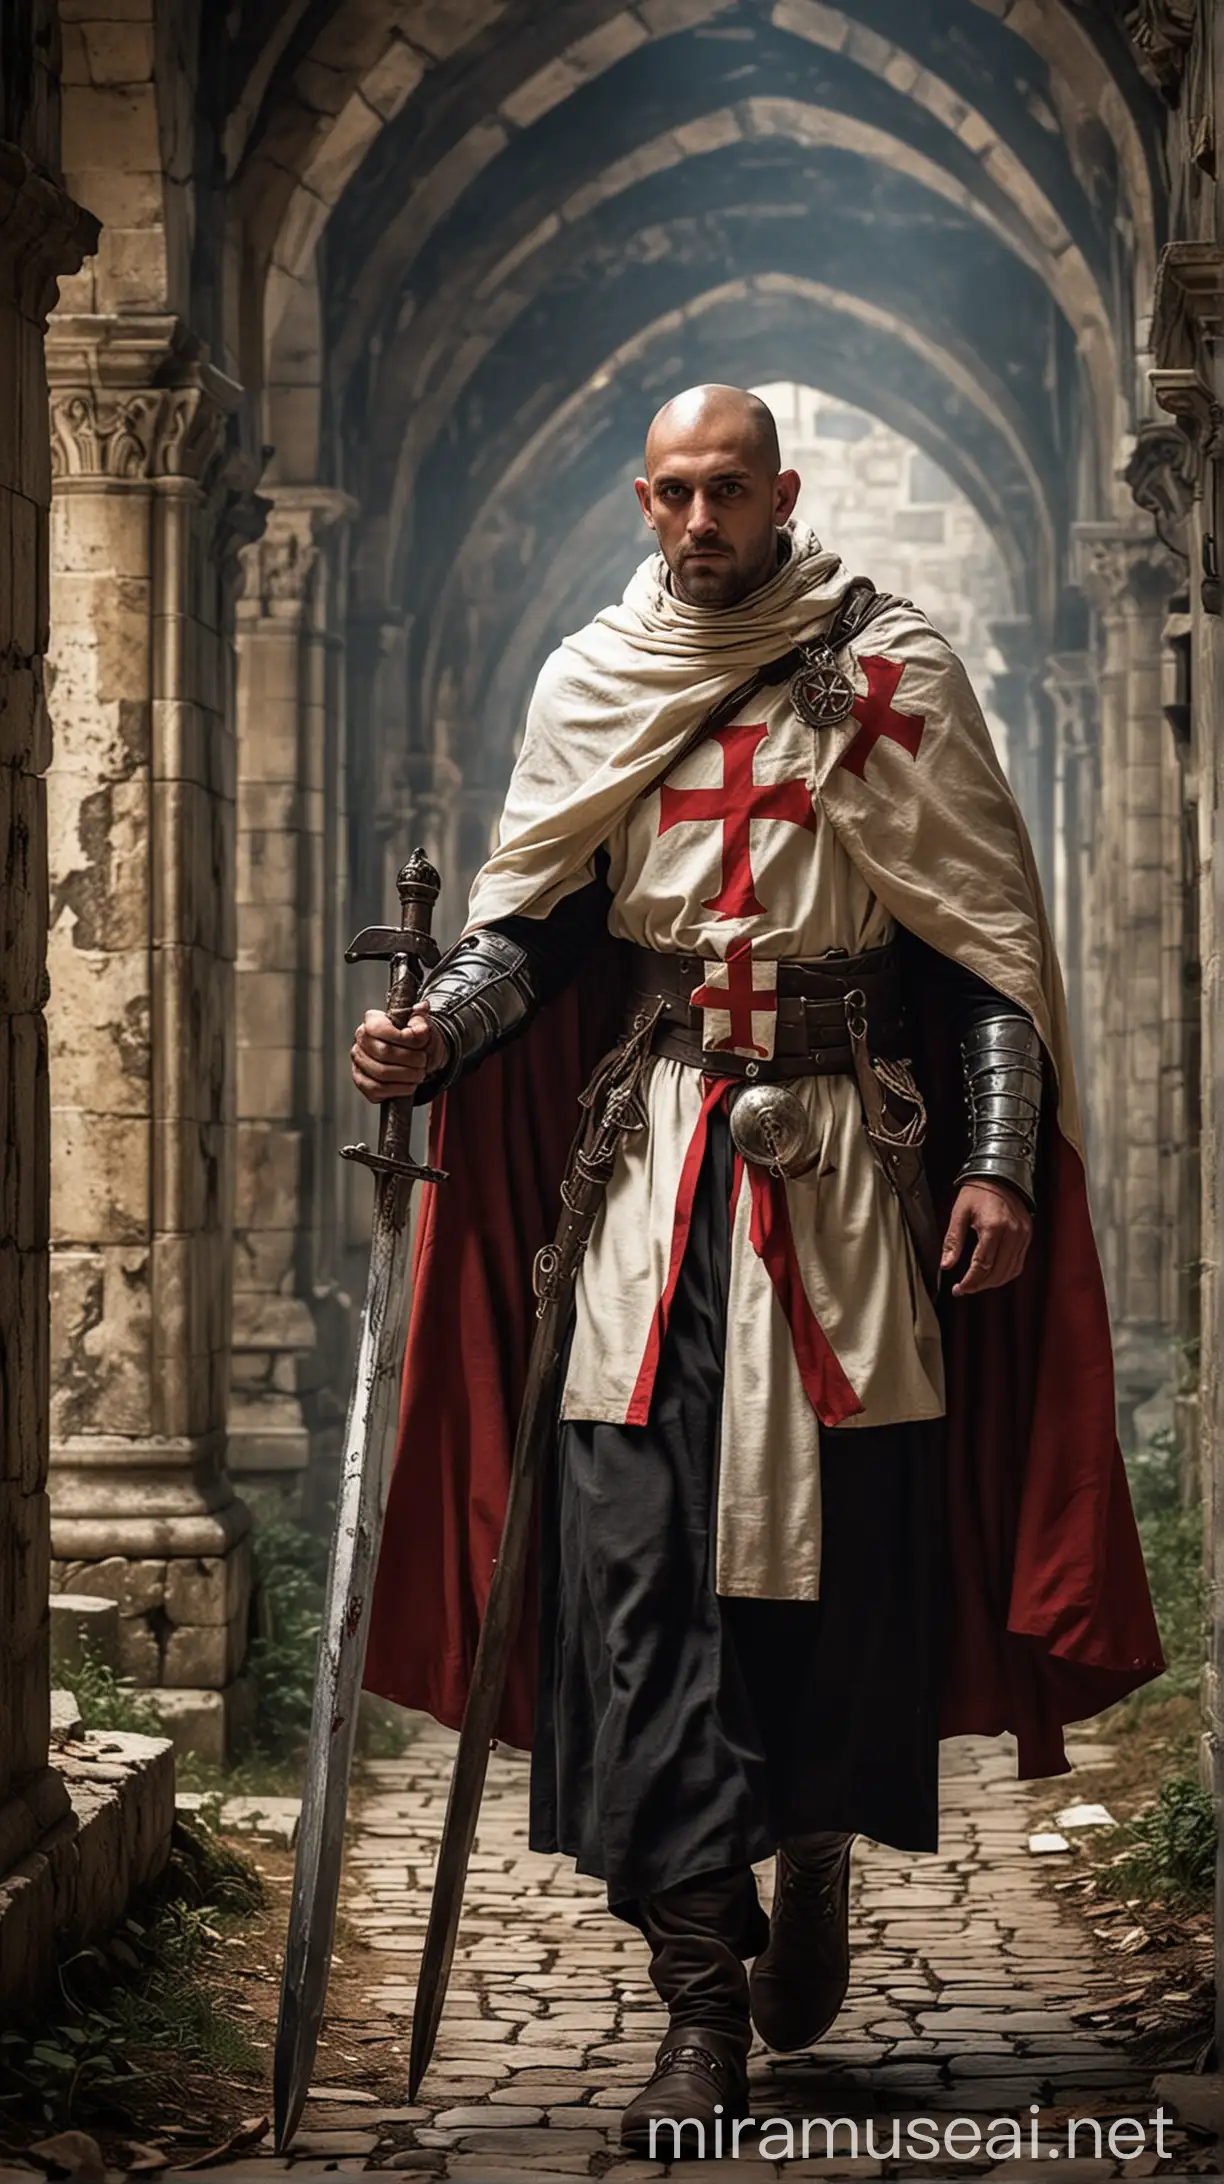 "Ever heard about the mysterious Knights Templar? These warrior monks were legendary for their bravery and intriguing tales. Let's dive into their fascinating world and discover their secrets." hyper realistic